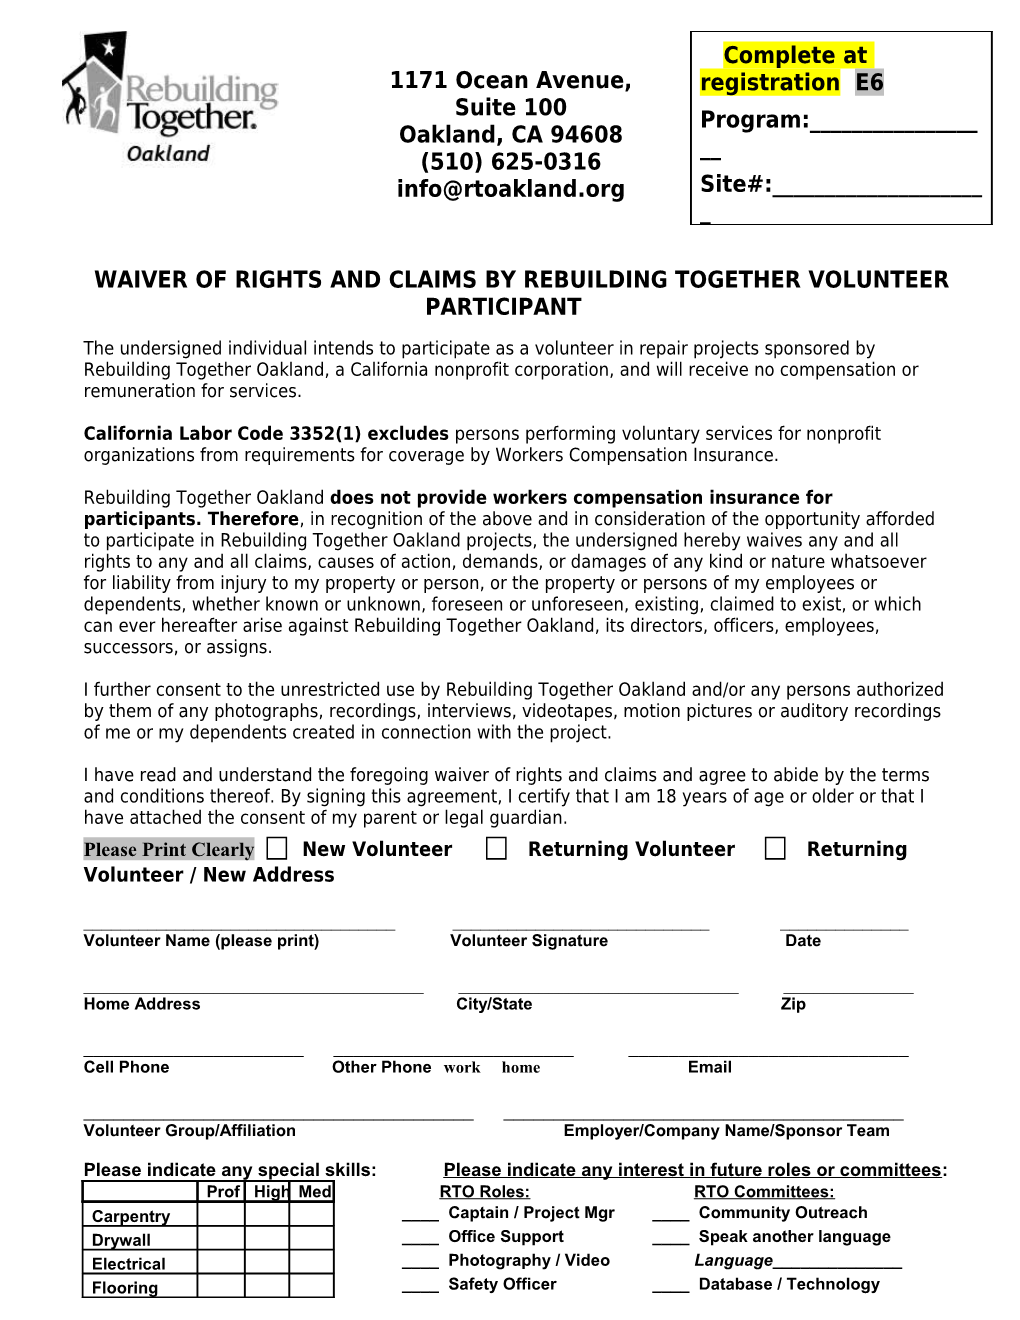 Waiver of Rights and Claims by Rebuilding Together Volunteer Participant